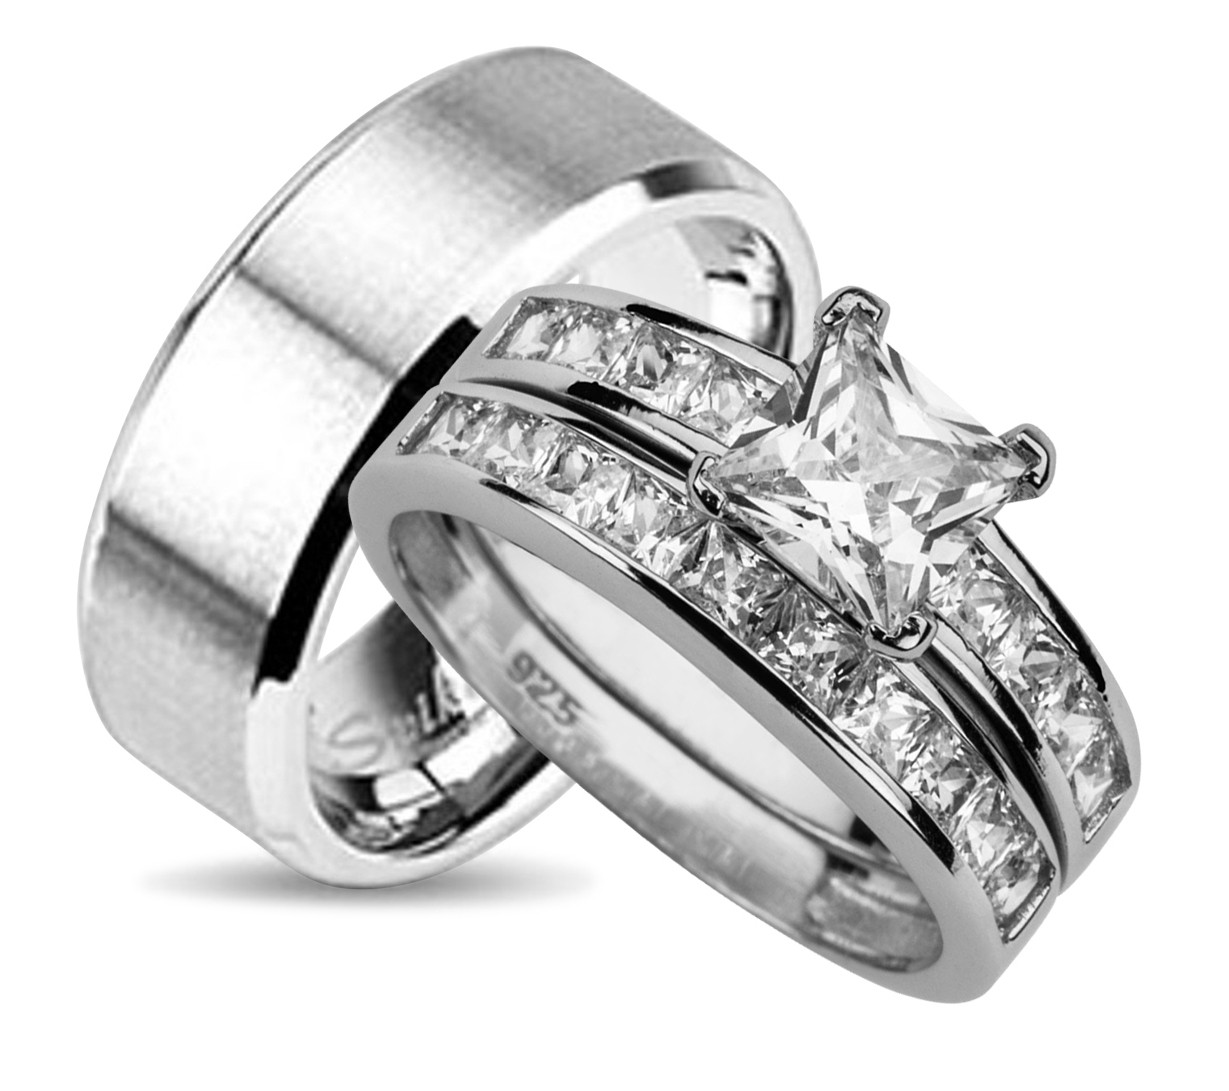 21 Best Ideas Cheap Wedding Rings for Him and Her - Home, Family, Style ...